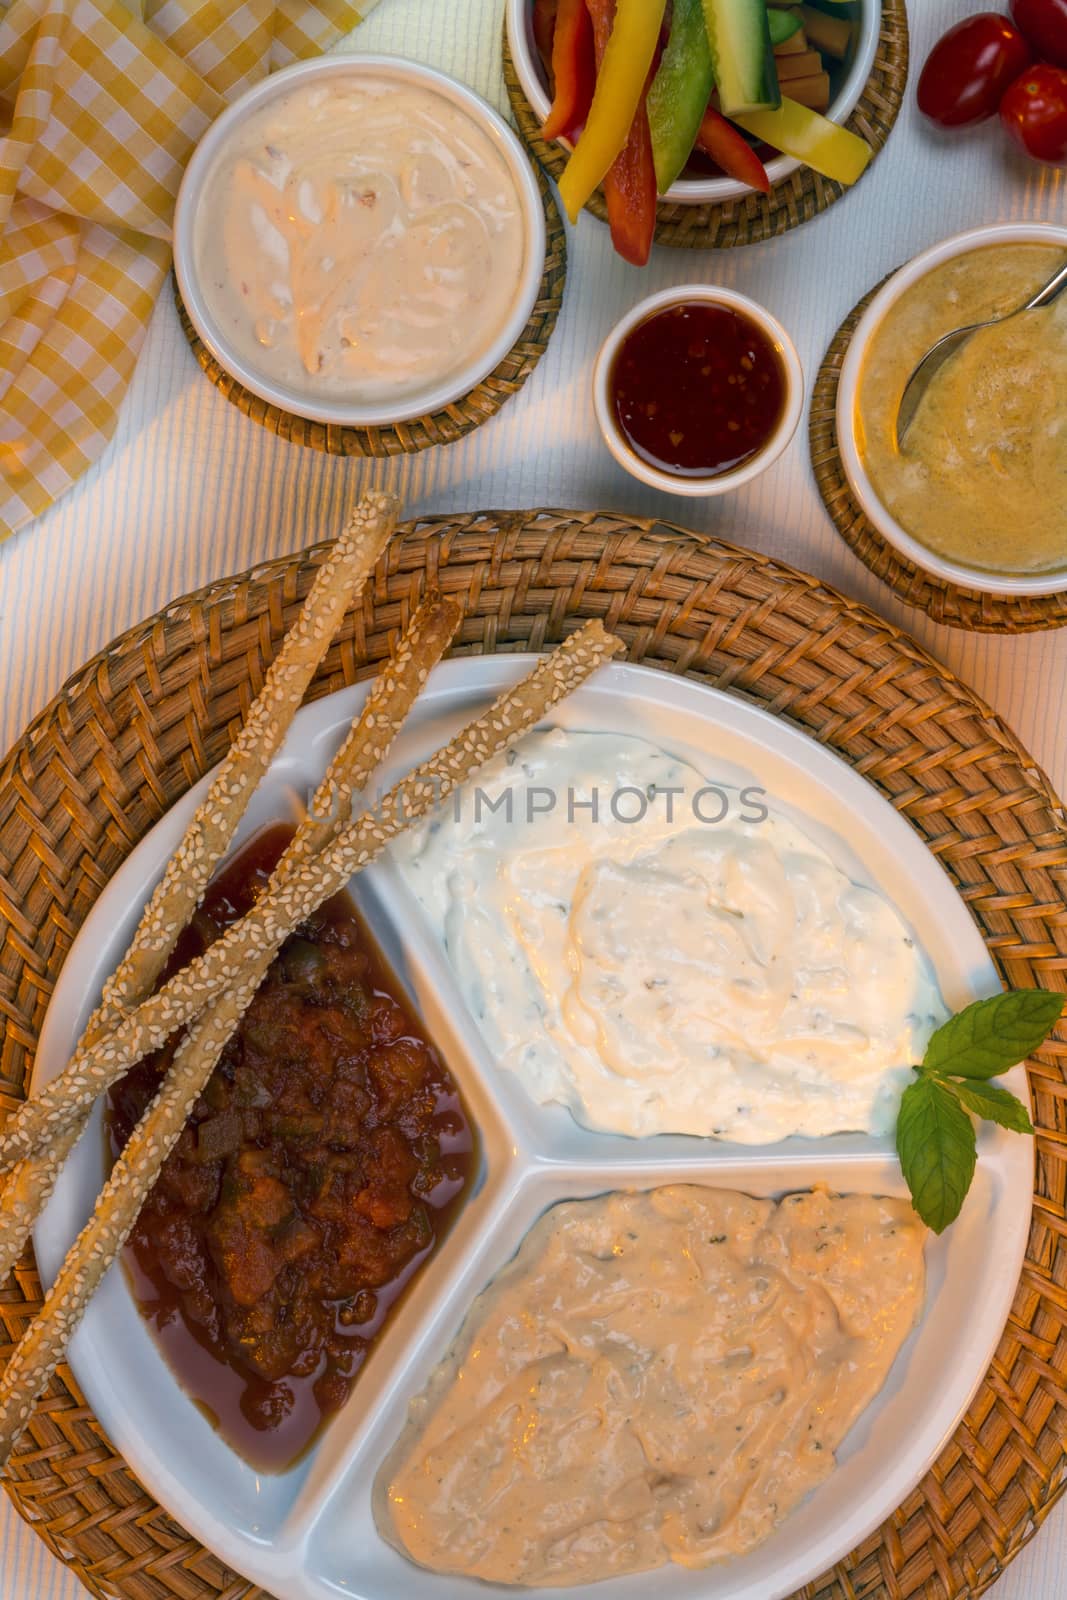 A selection of party dips with bread sticks, pita bread and other crudites.